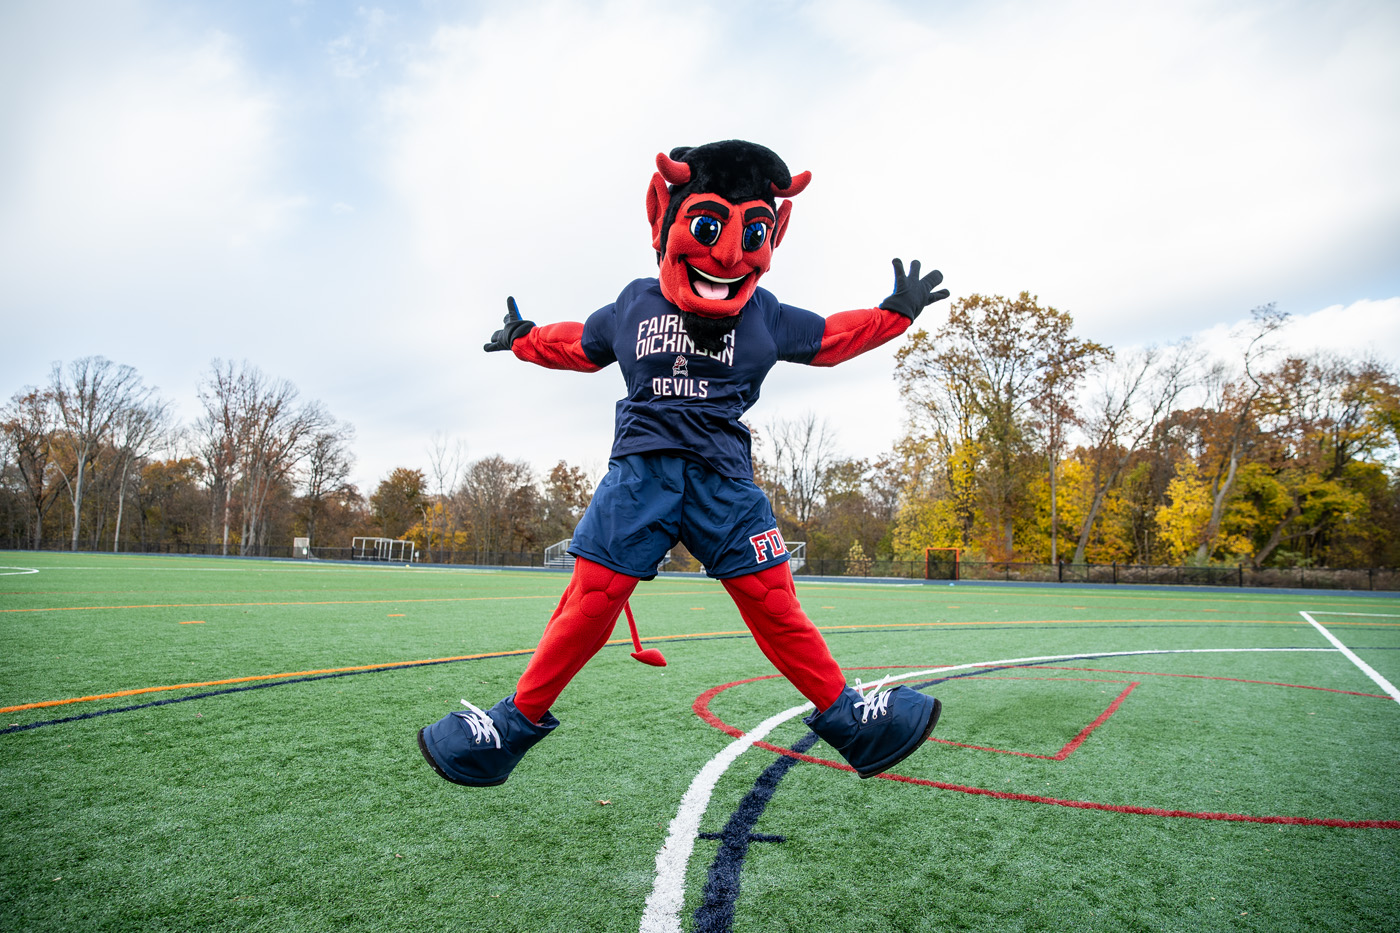 The Devil mascot leaps into the air.